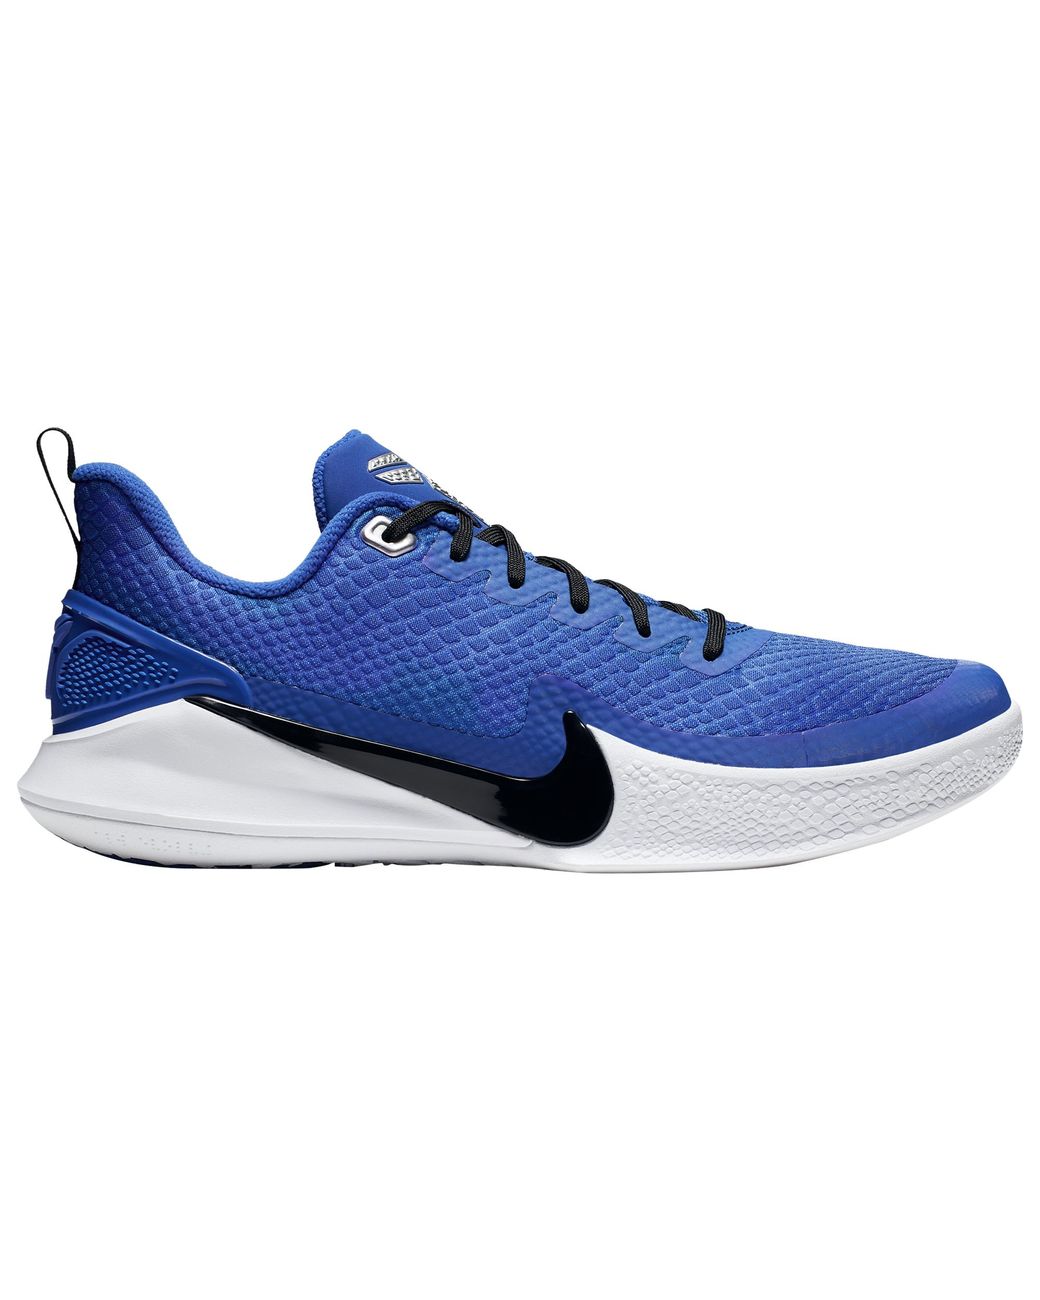 Nike Mamba Focus Basketball Shoes in Blue for Men - Save 41% - Lyst